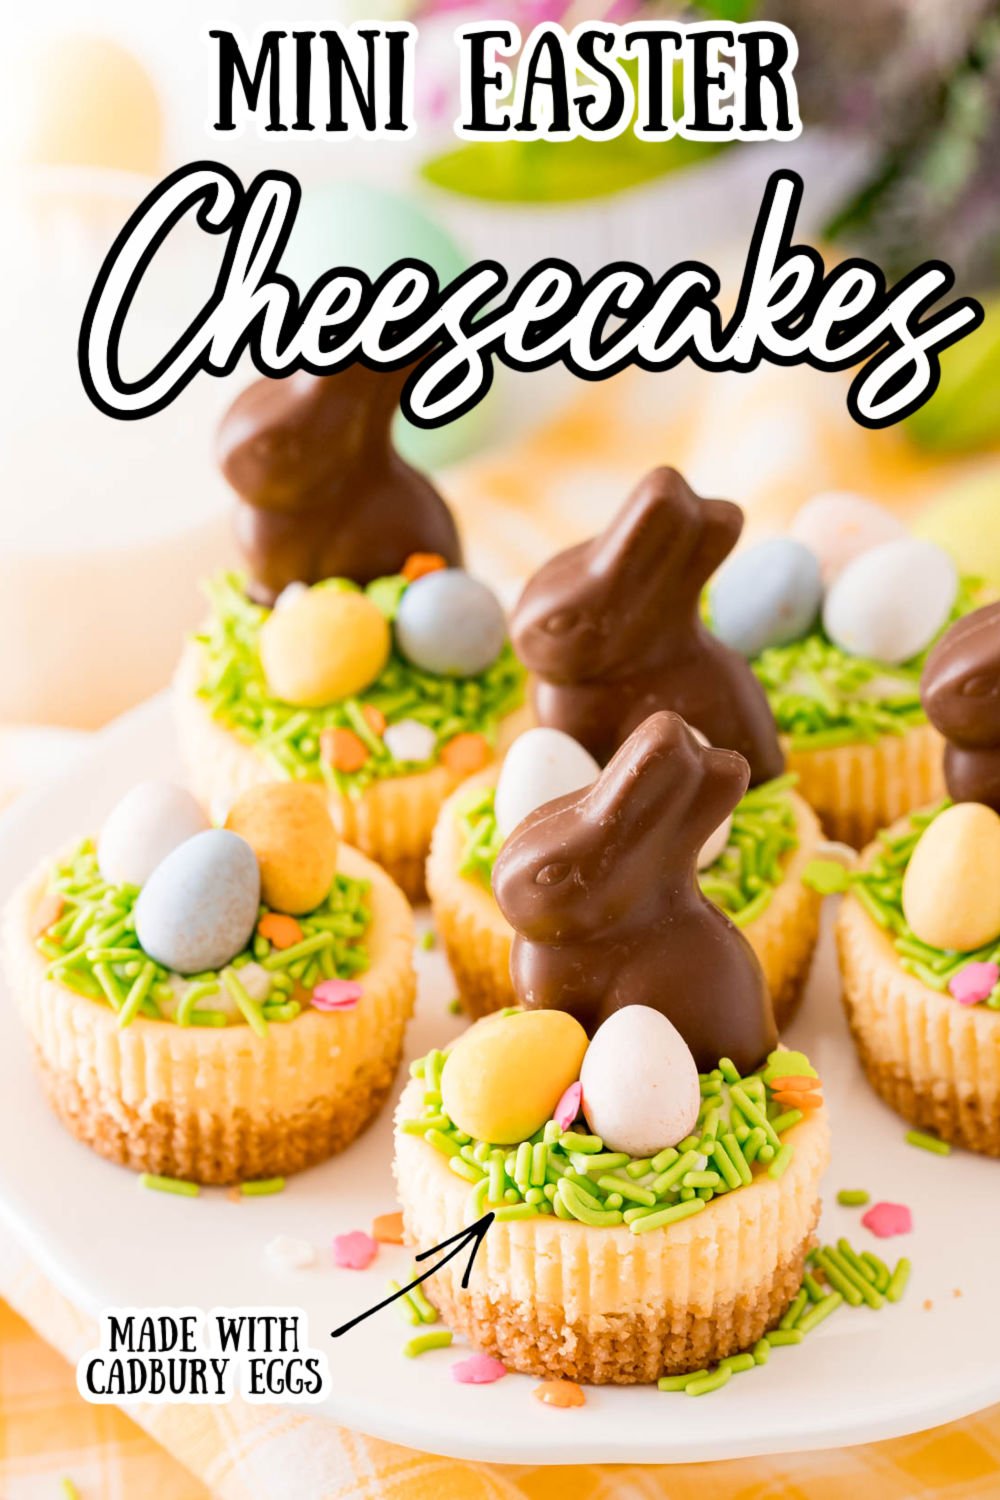 Mini Easter Cheesecakes are rich bite-sized cheesecakes topped with fun Easter candy for the perfect holiday dessert that kids will love!
 via @sugarandsoulco